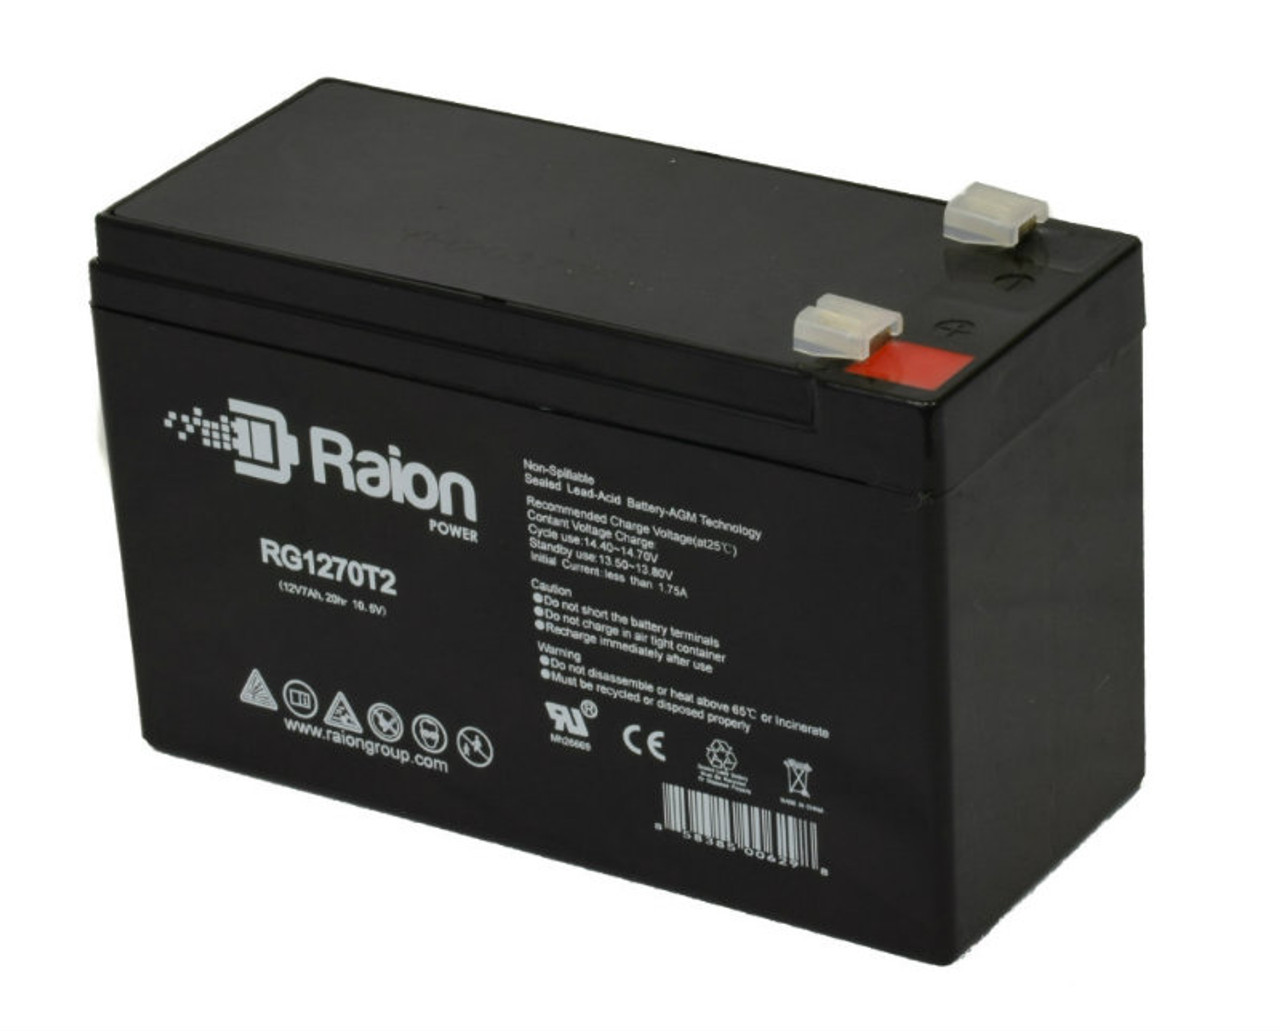 Raion Power Replacement 12V 7Ah Battery for Best Choice Products SKY4937 4-Wheeler Quad ATV Ride-On - Black - 1 Pack